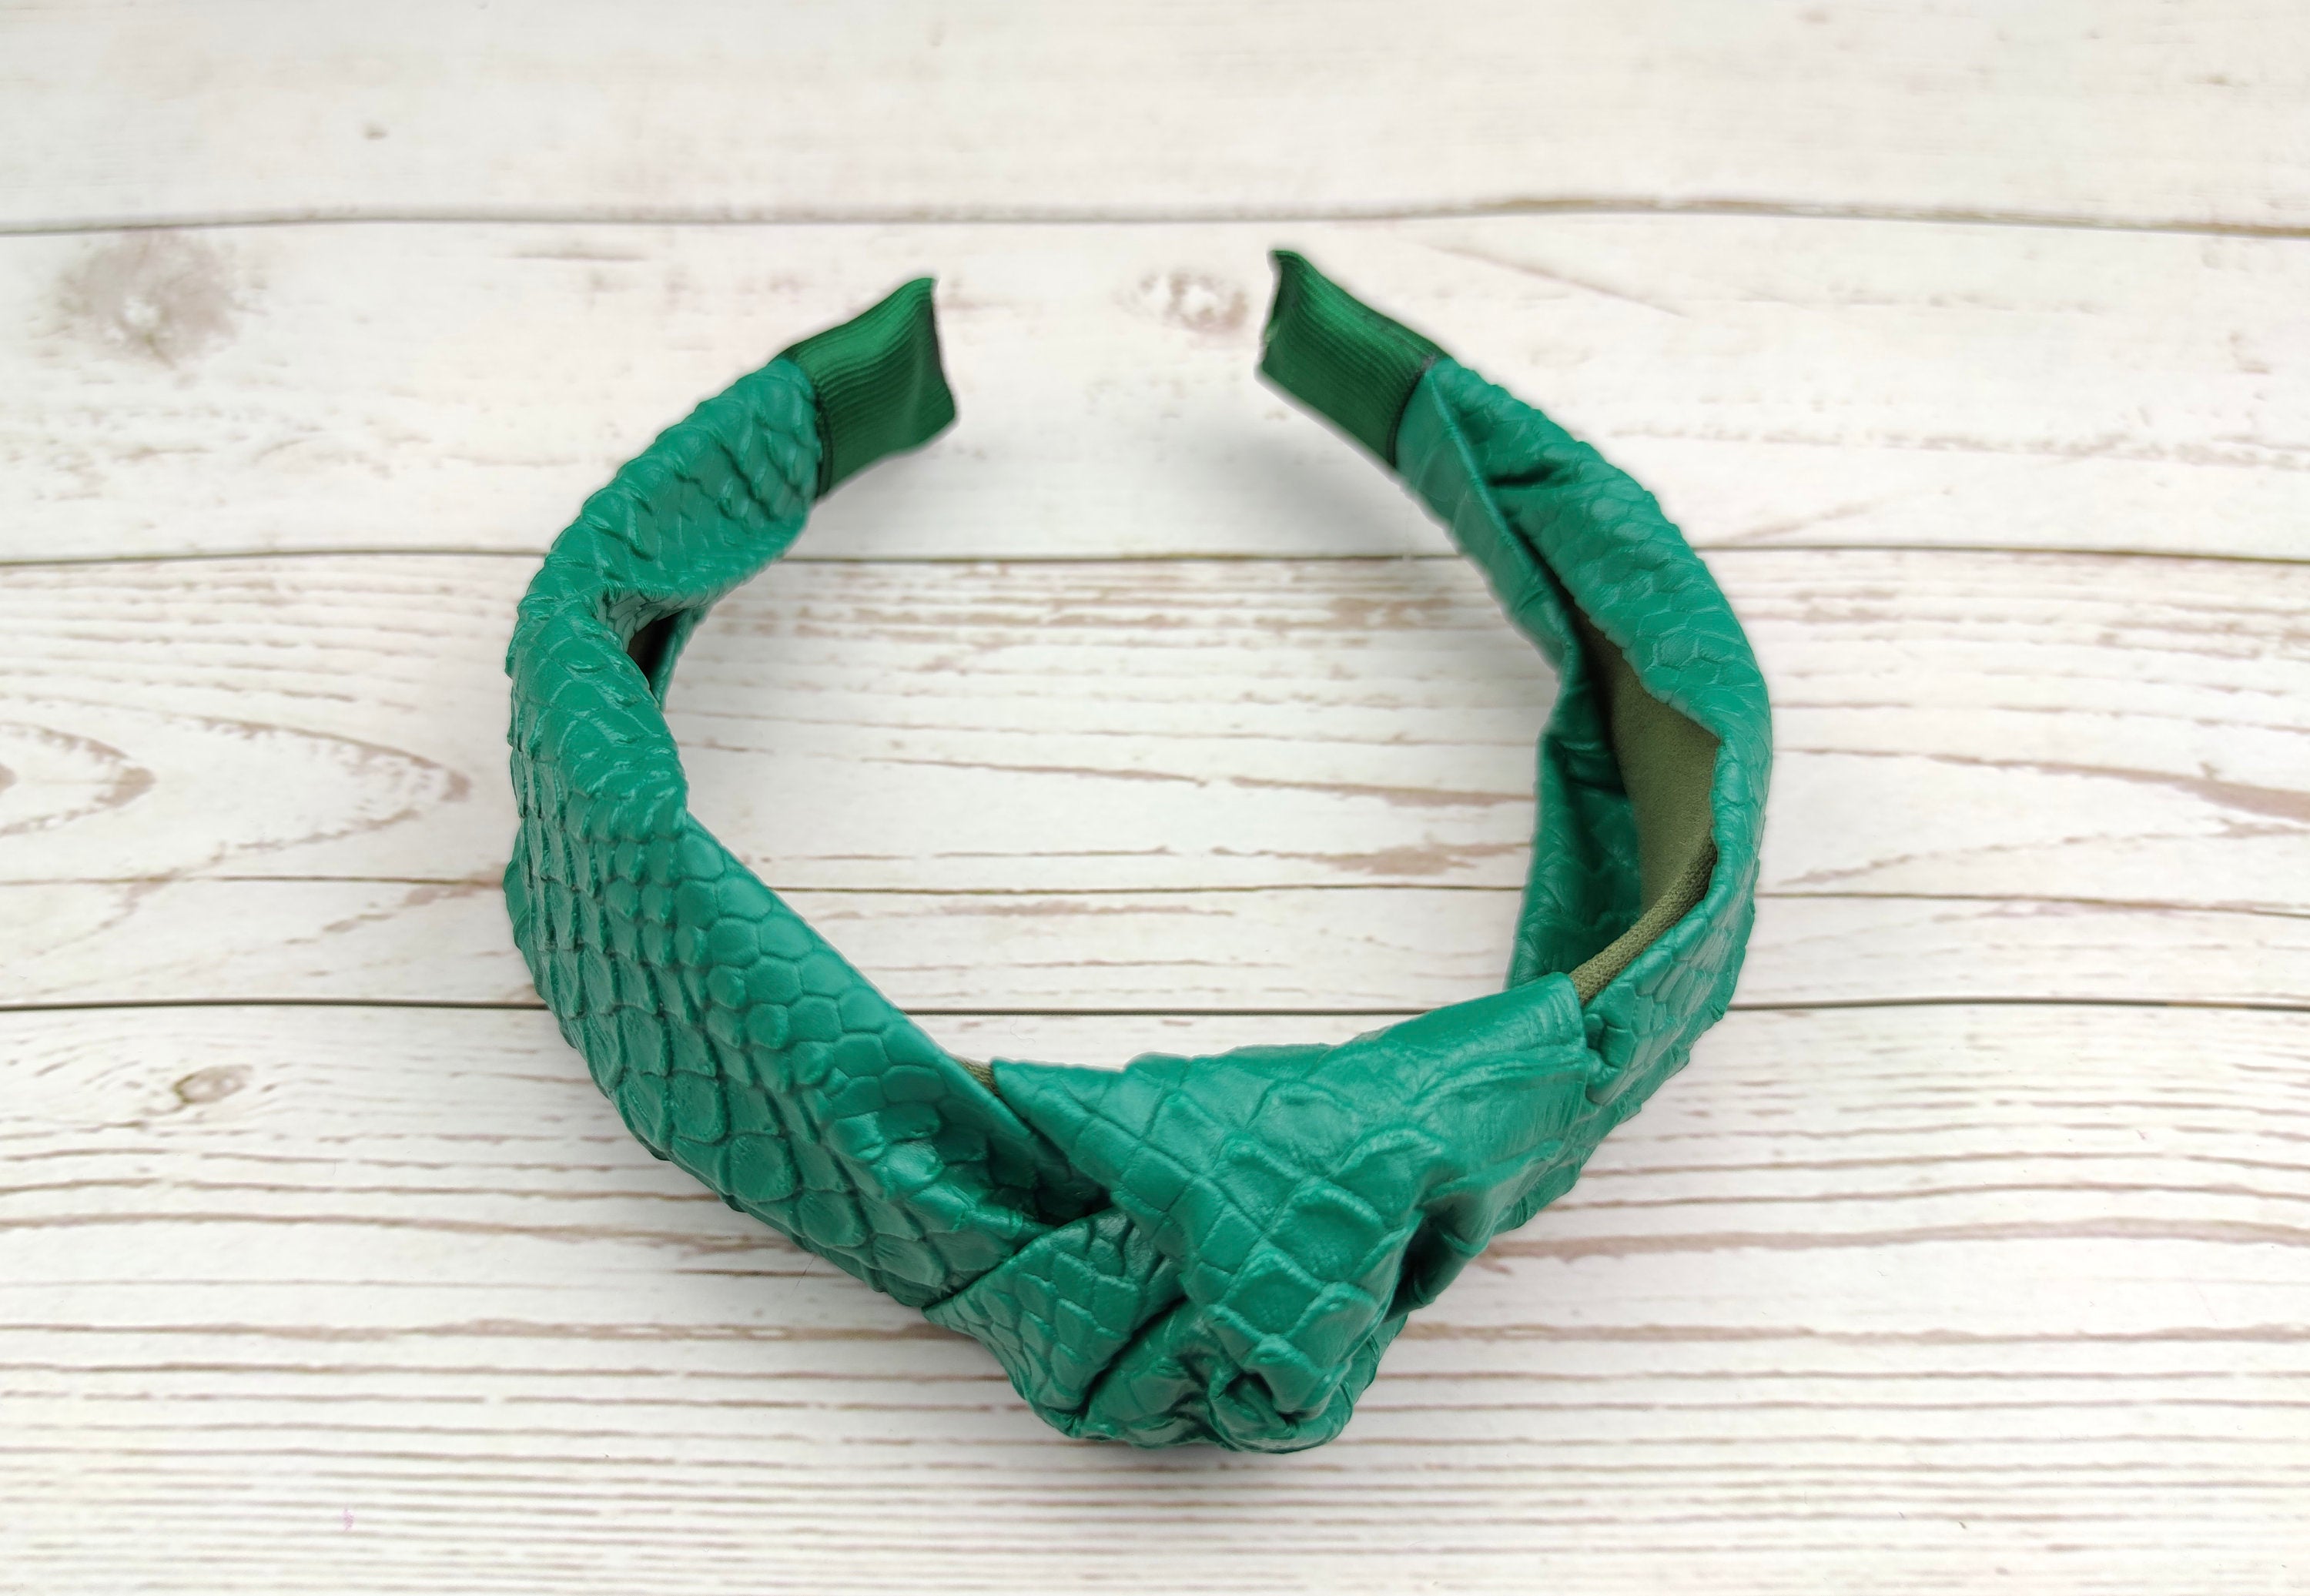 Stay stylish and comfortable with this green padded headband.